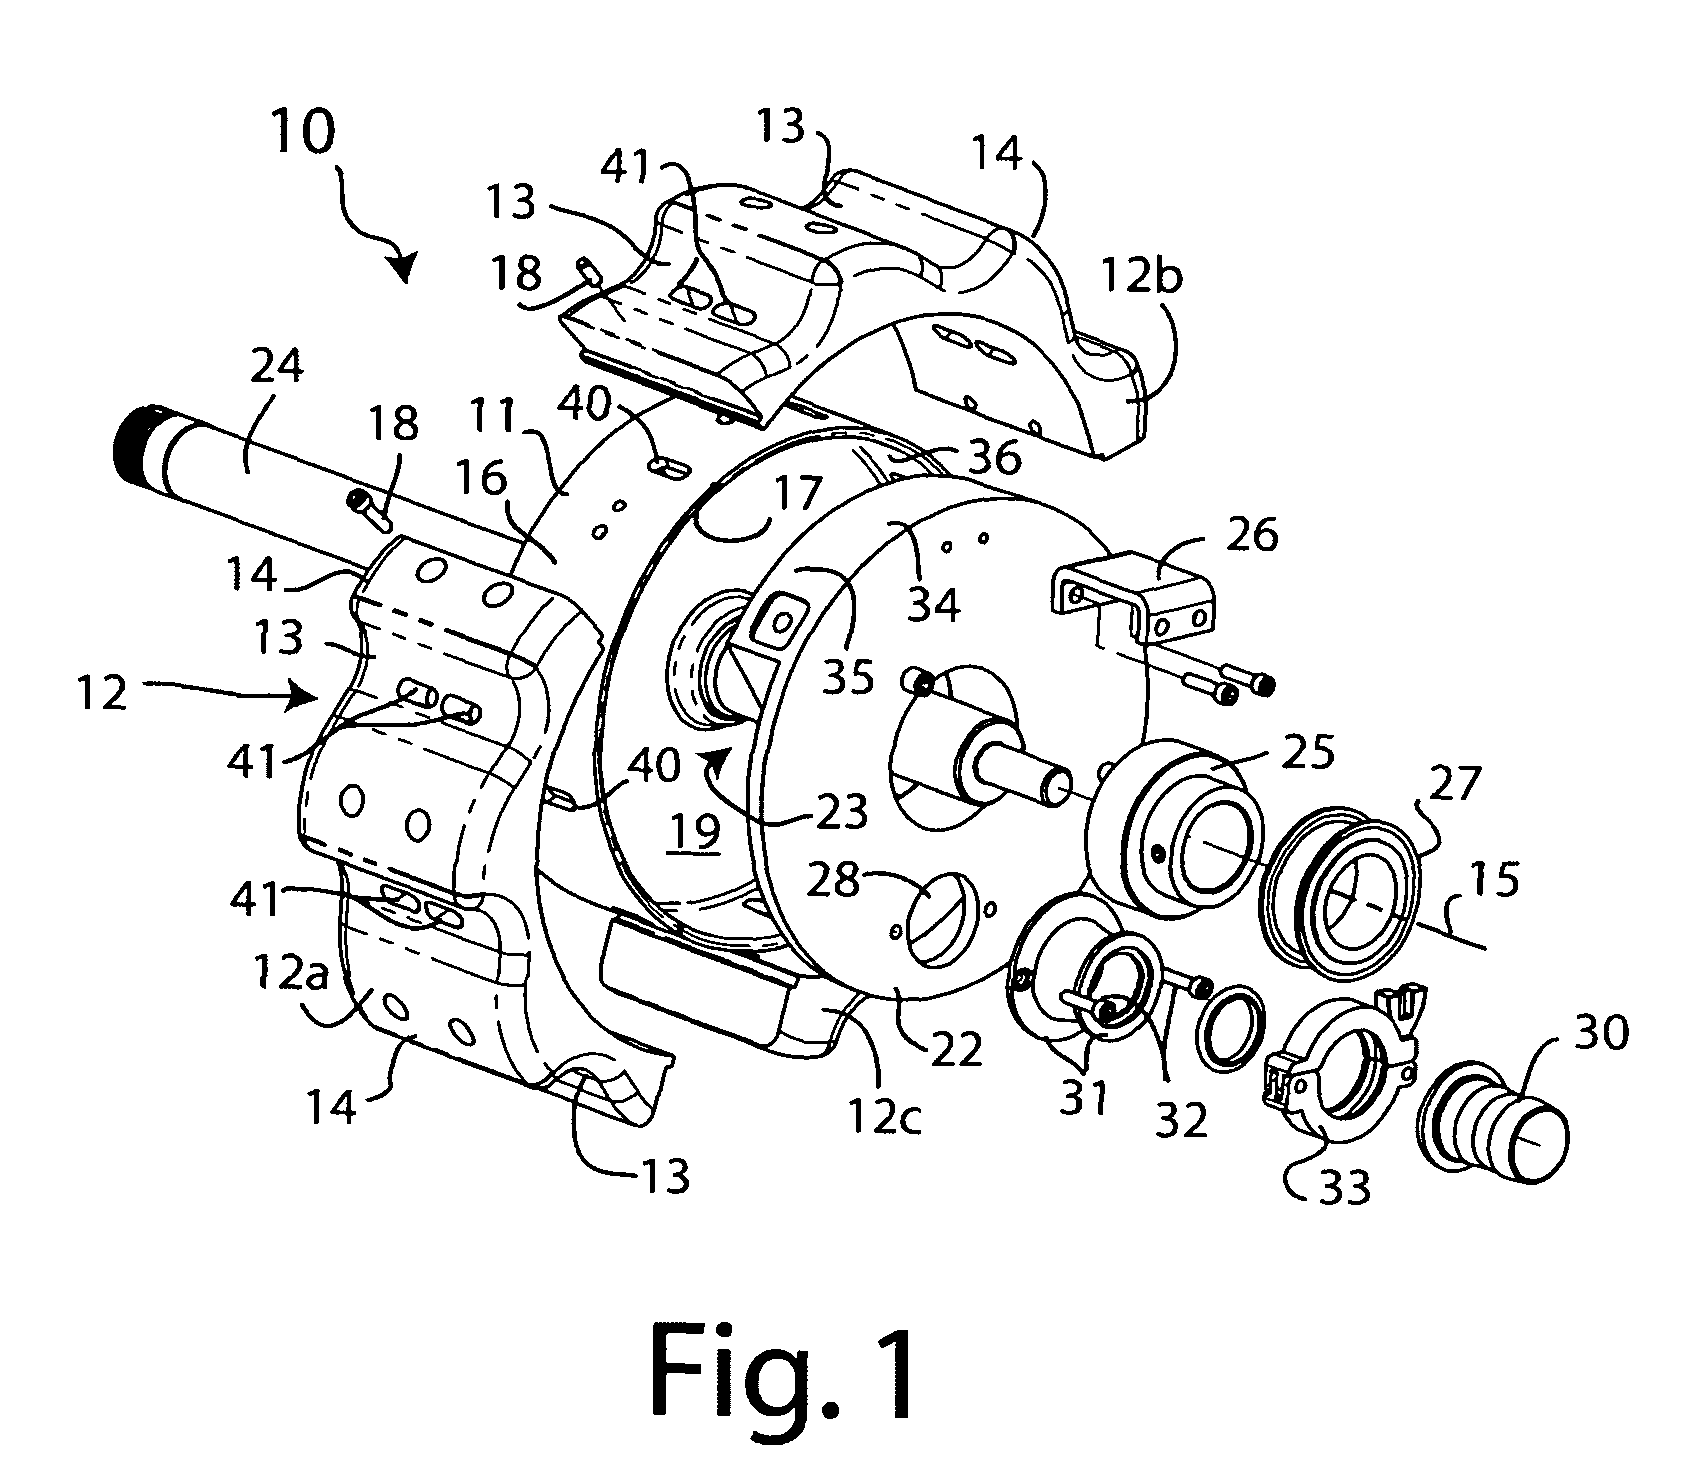 Star wheel with vacuum capability for retaining conveyed articles